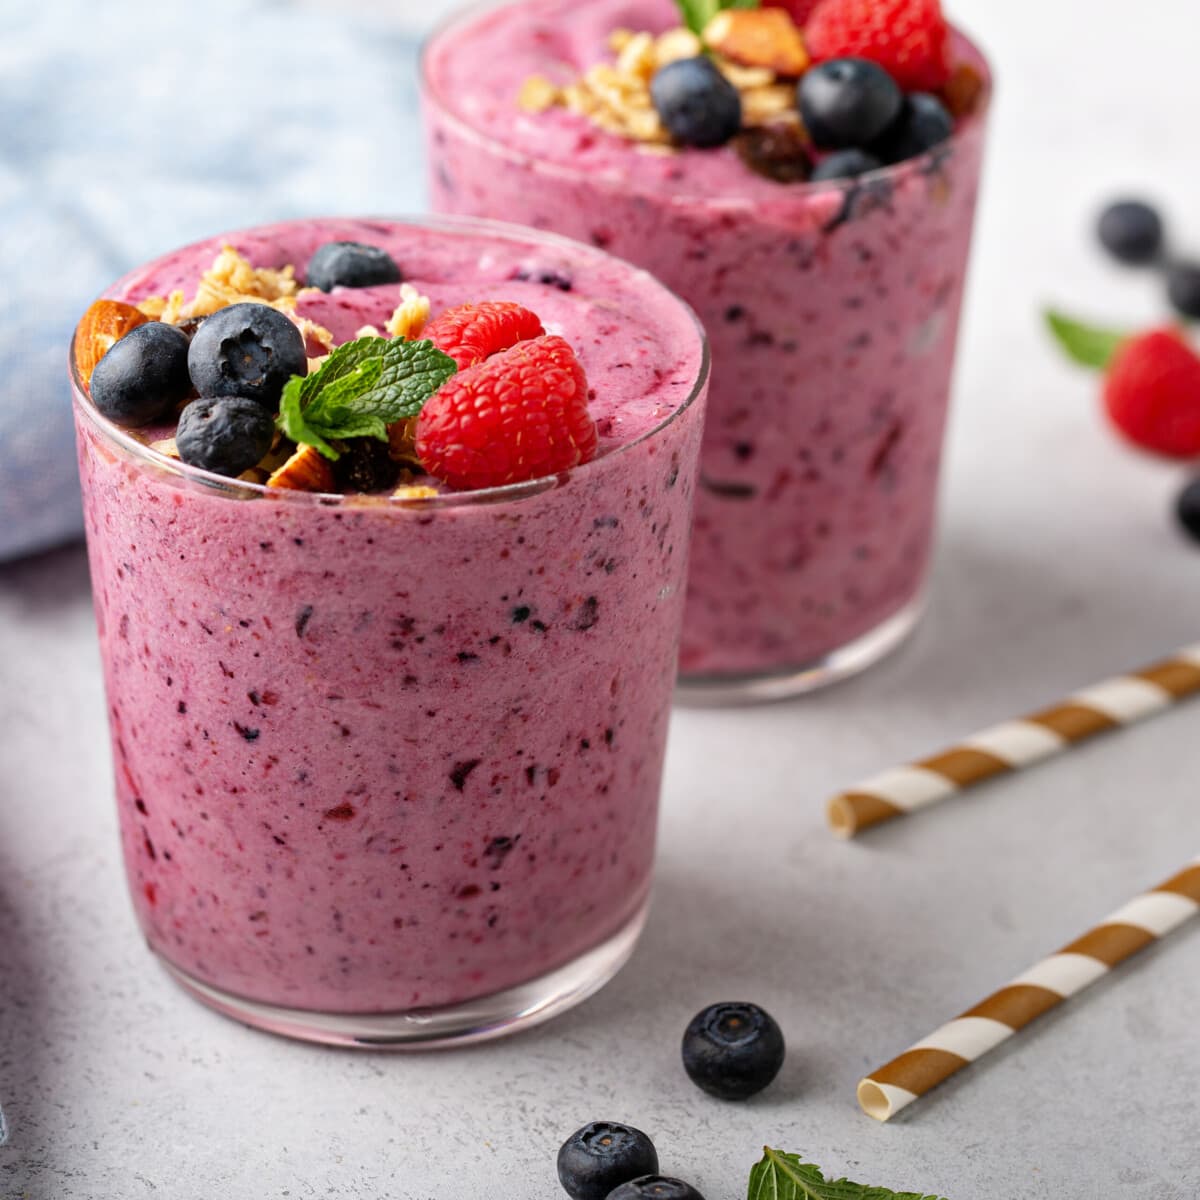 two mixed berry smoothies, topped with crushed nuts, fresh berries, and mint